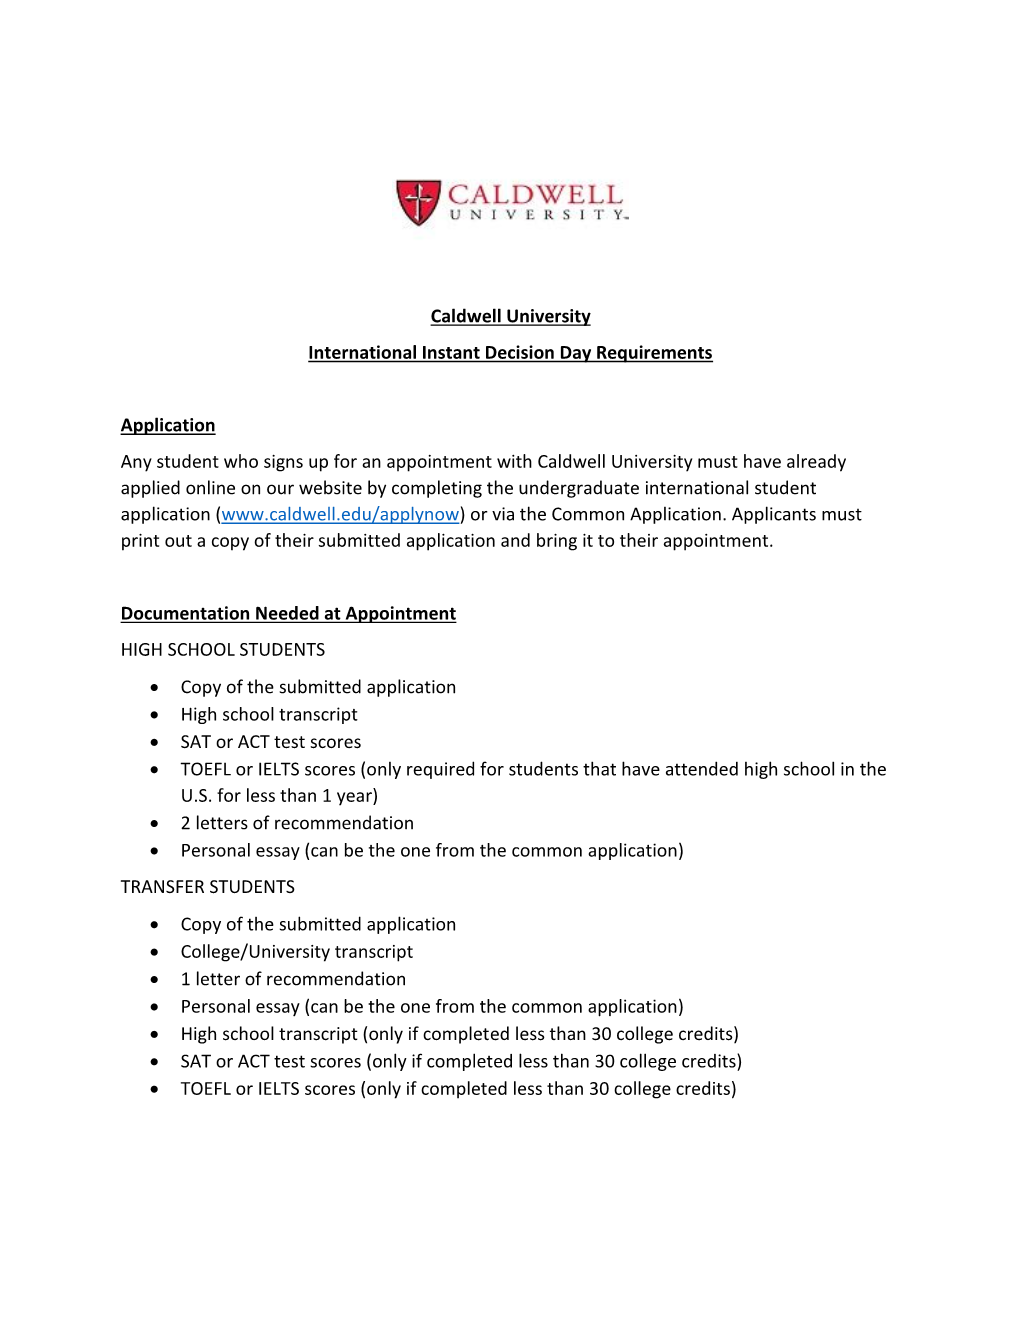 Caldwell University International Instant Decision Day Requirements